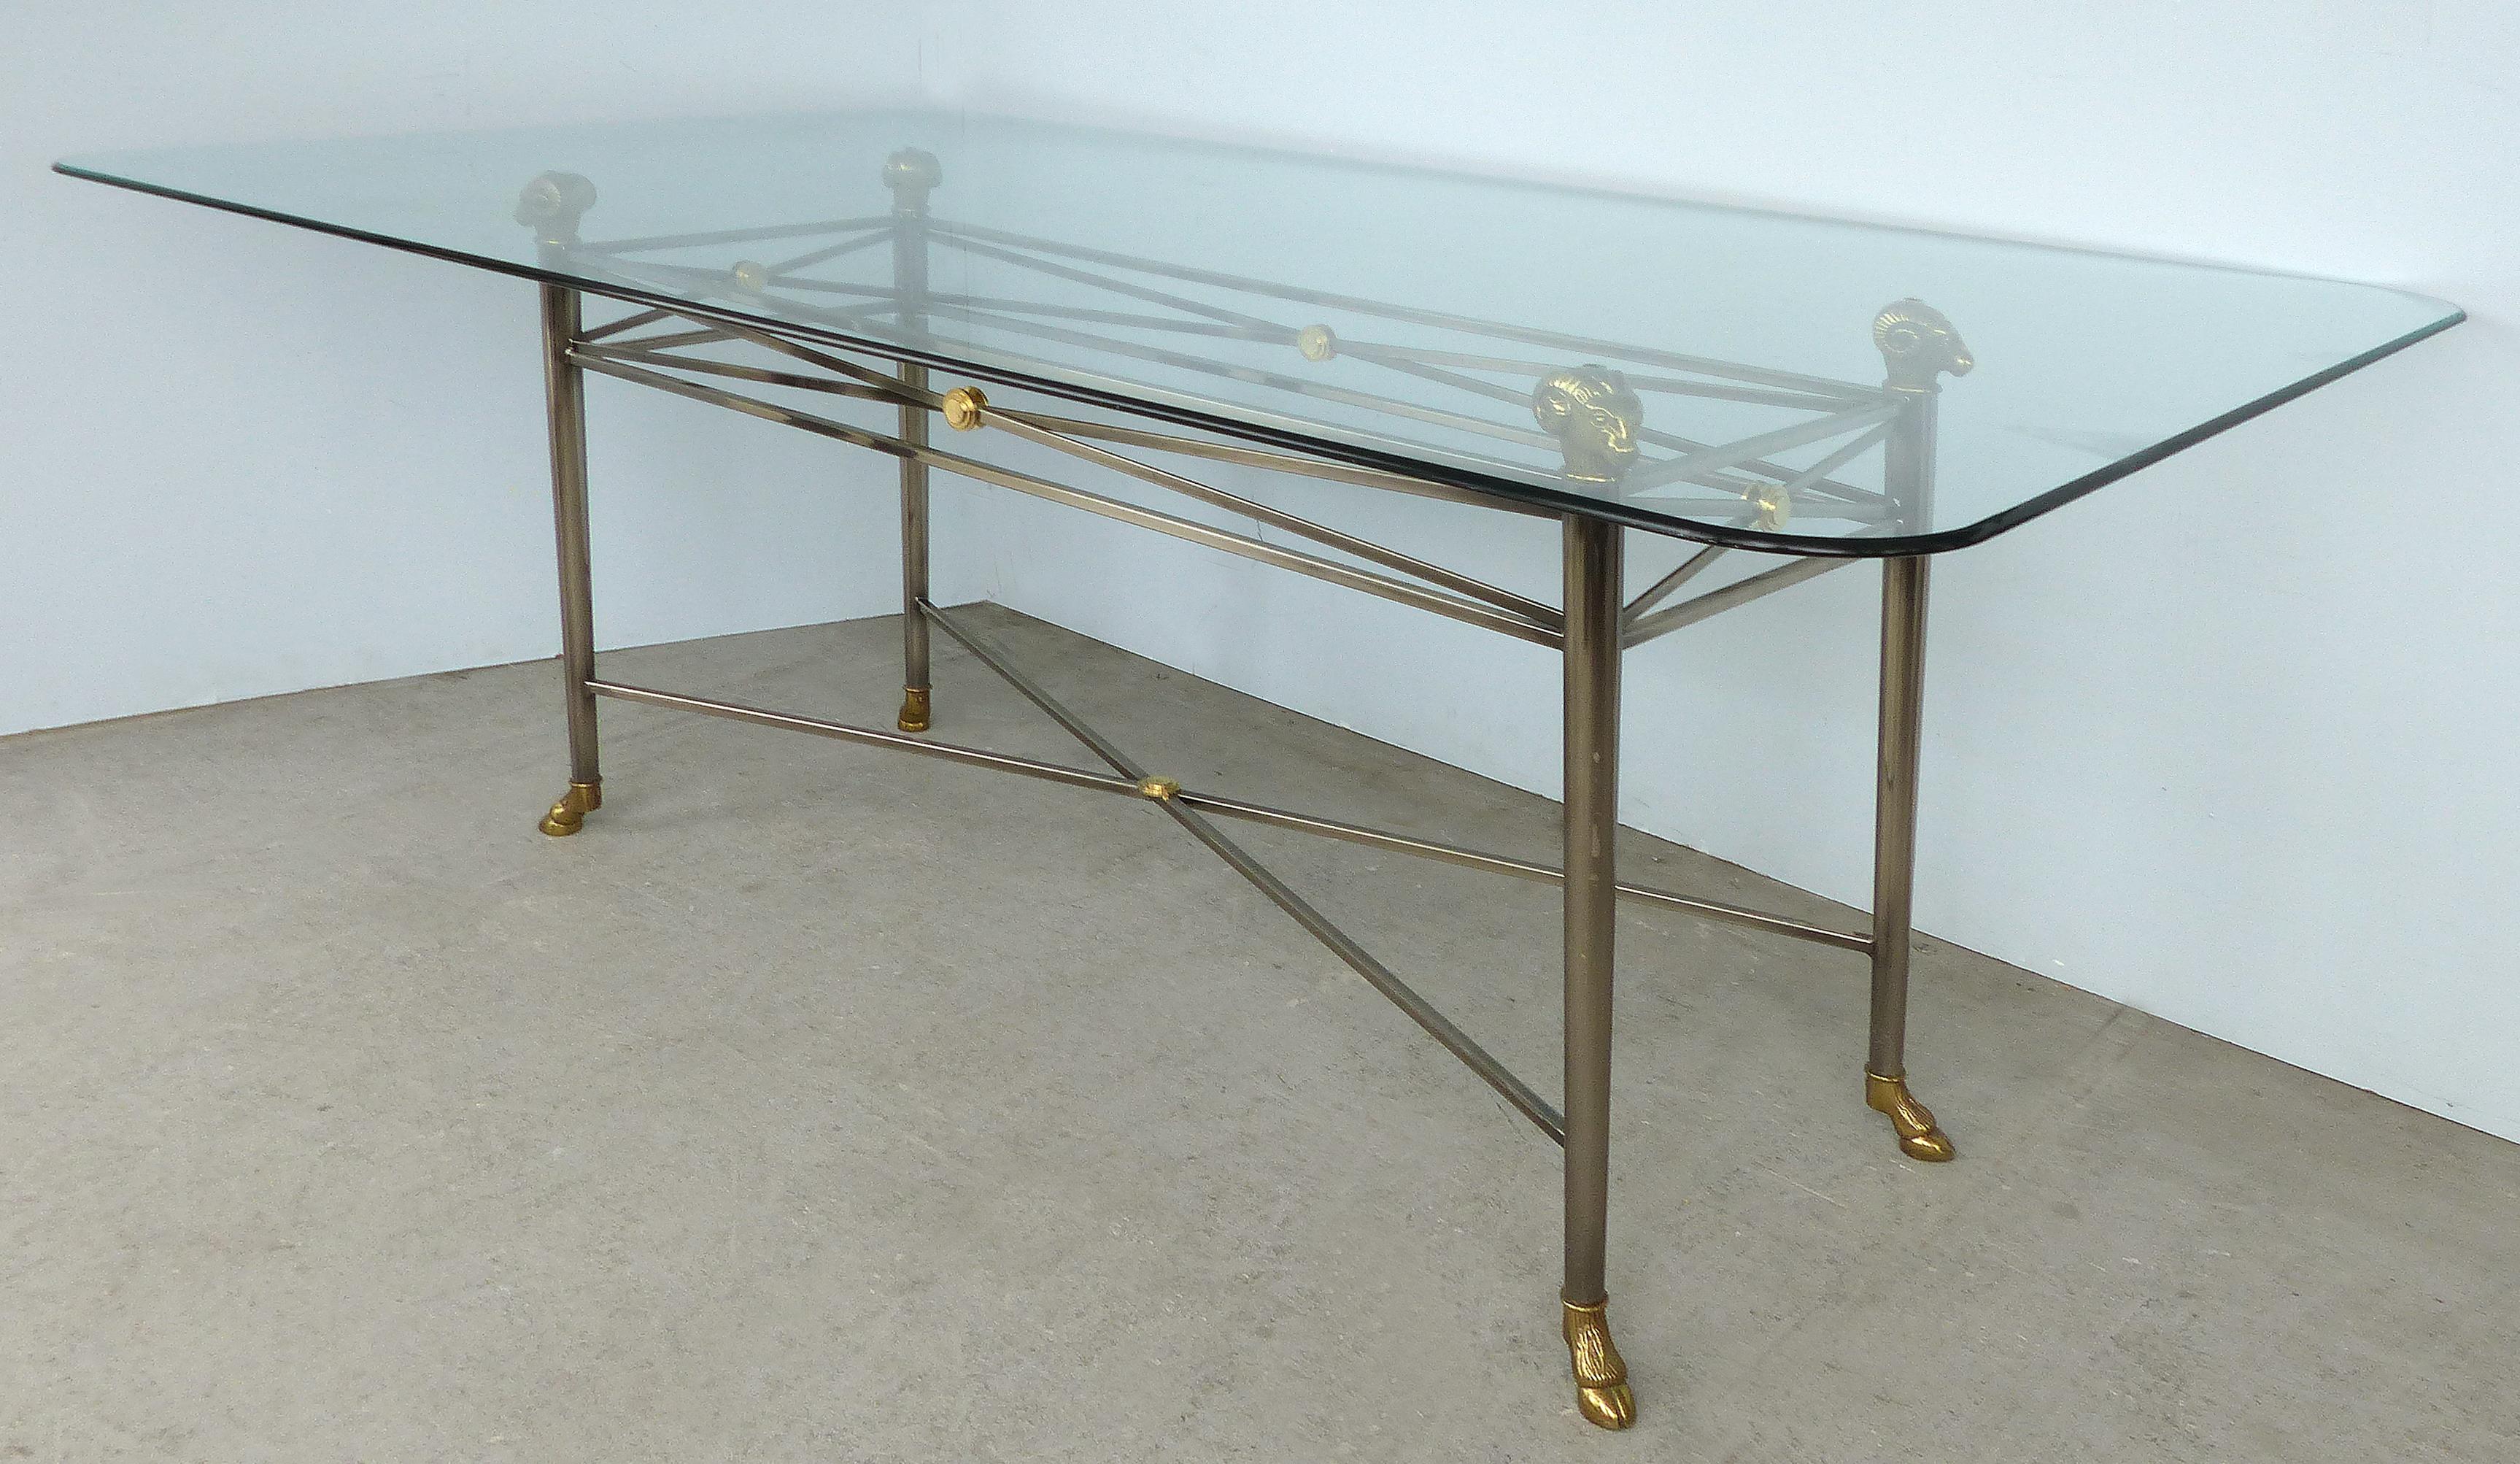 Italianate DIA Steel and Brass Dining Table with Ram's Heads and Hoof Feet

Offered for sale in an Italianate style steel and brass dining table with ram's head and hoof feet and glass top manufactured by the Design Institute of America (DIA). The